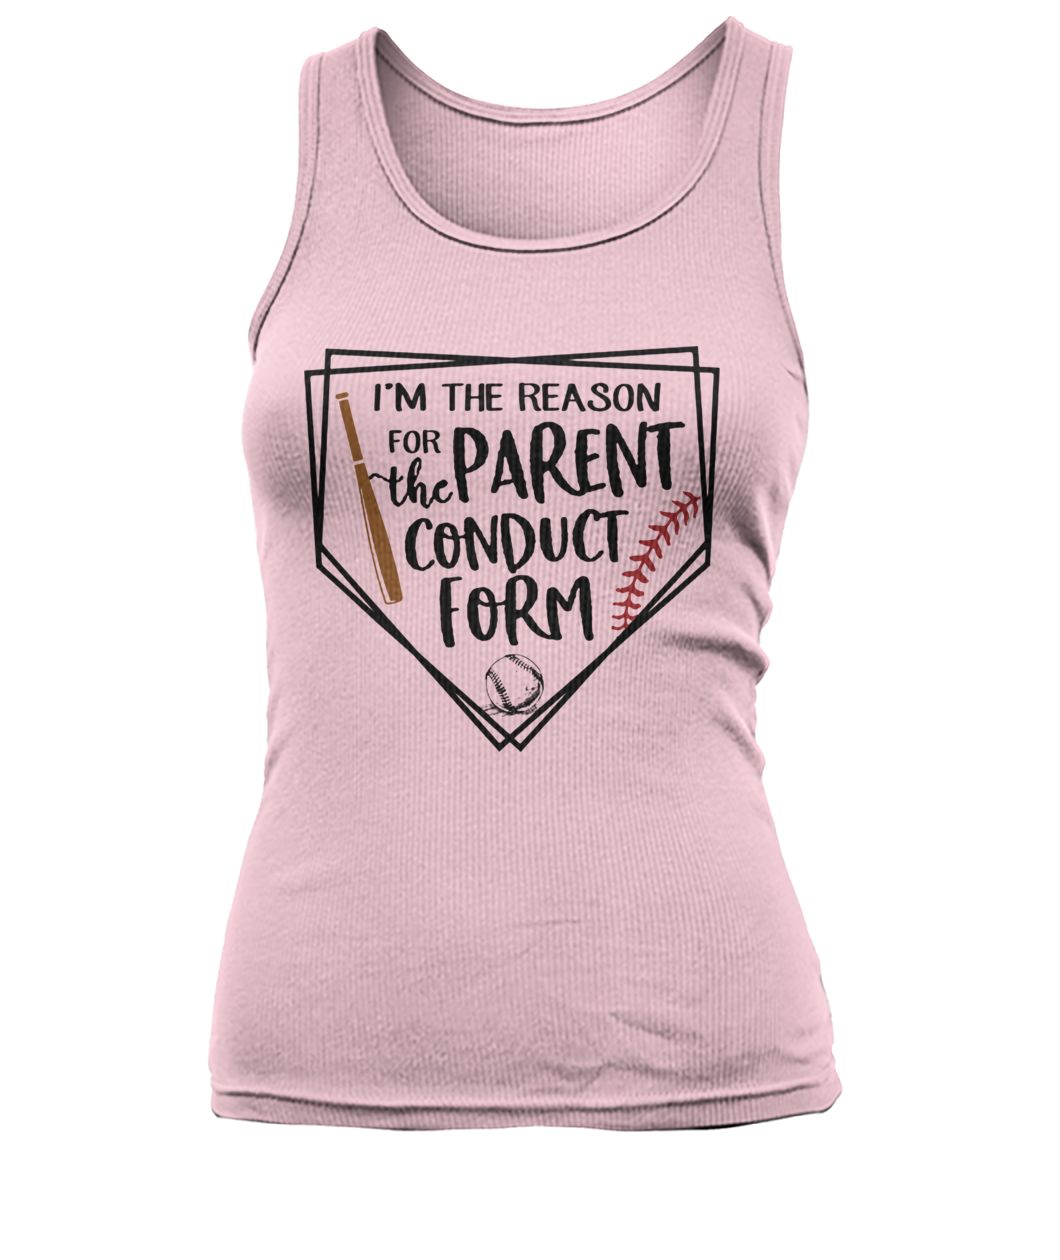 I'm the reason for the parent conduct form baseball women's tank top